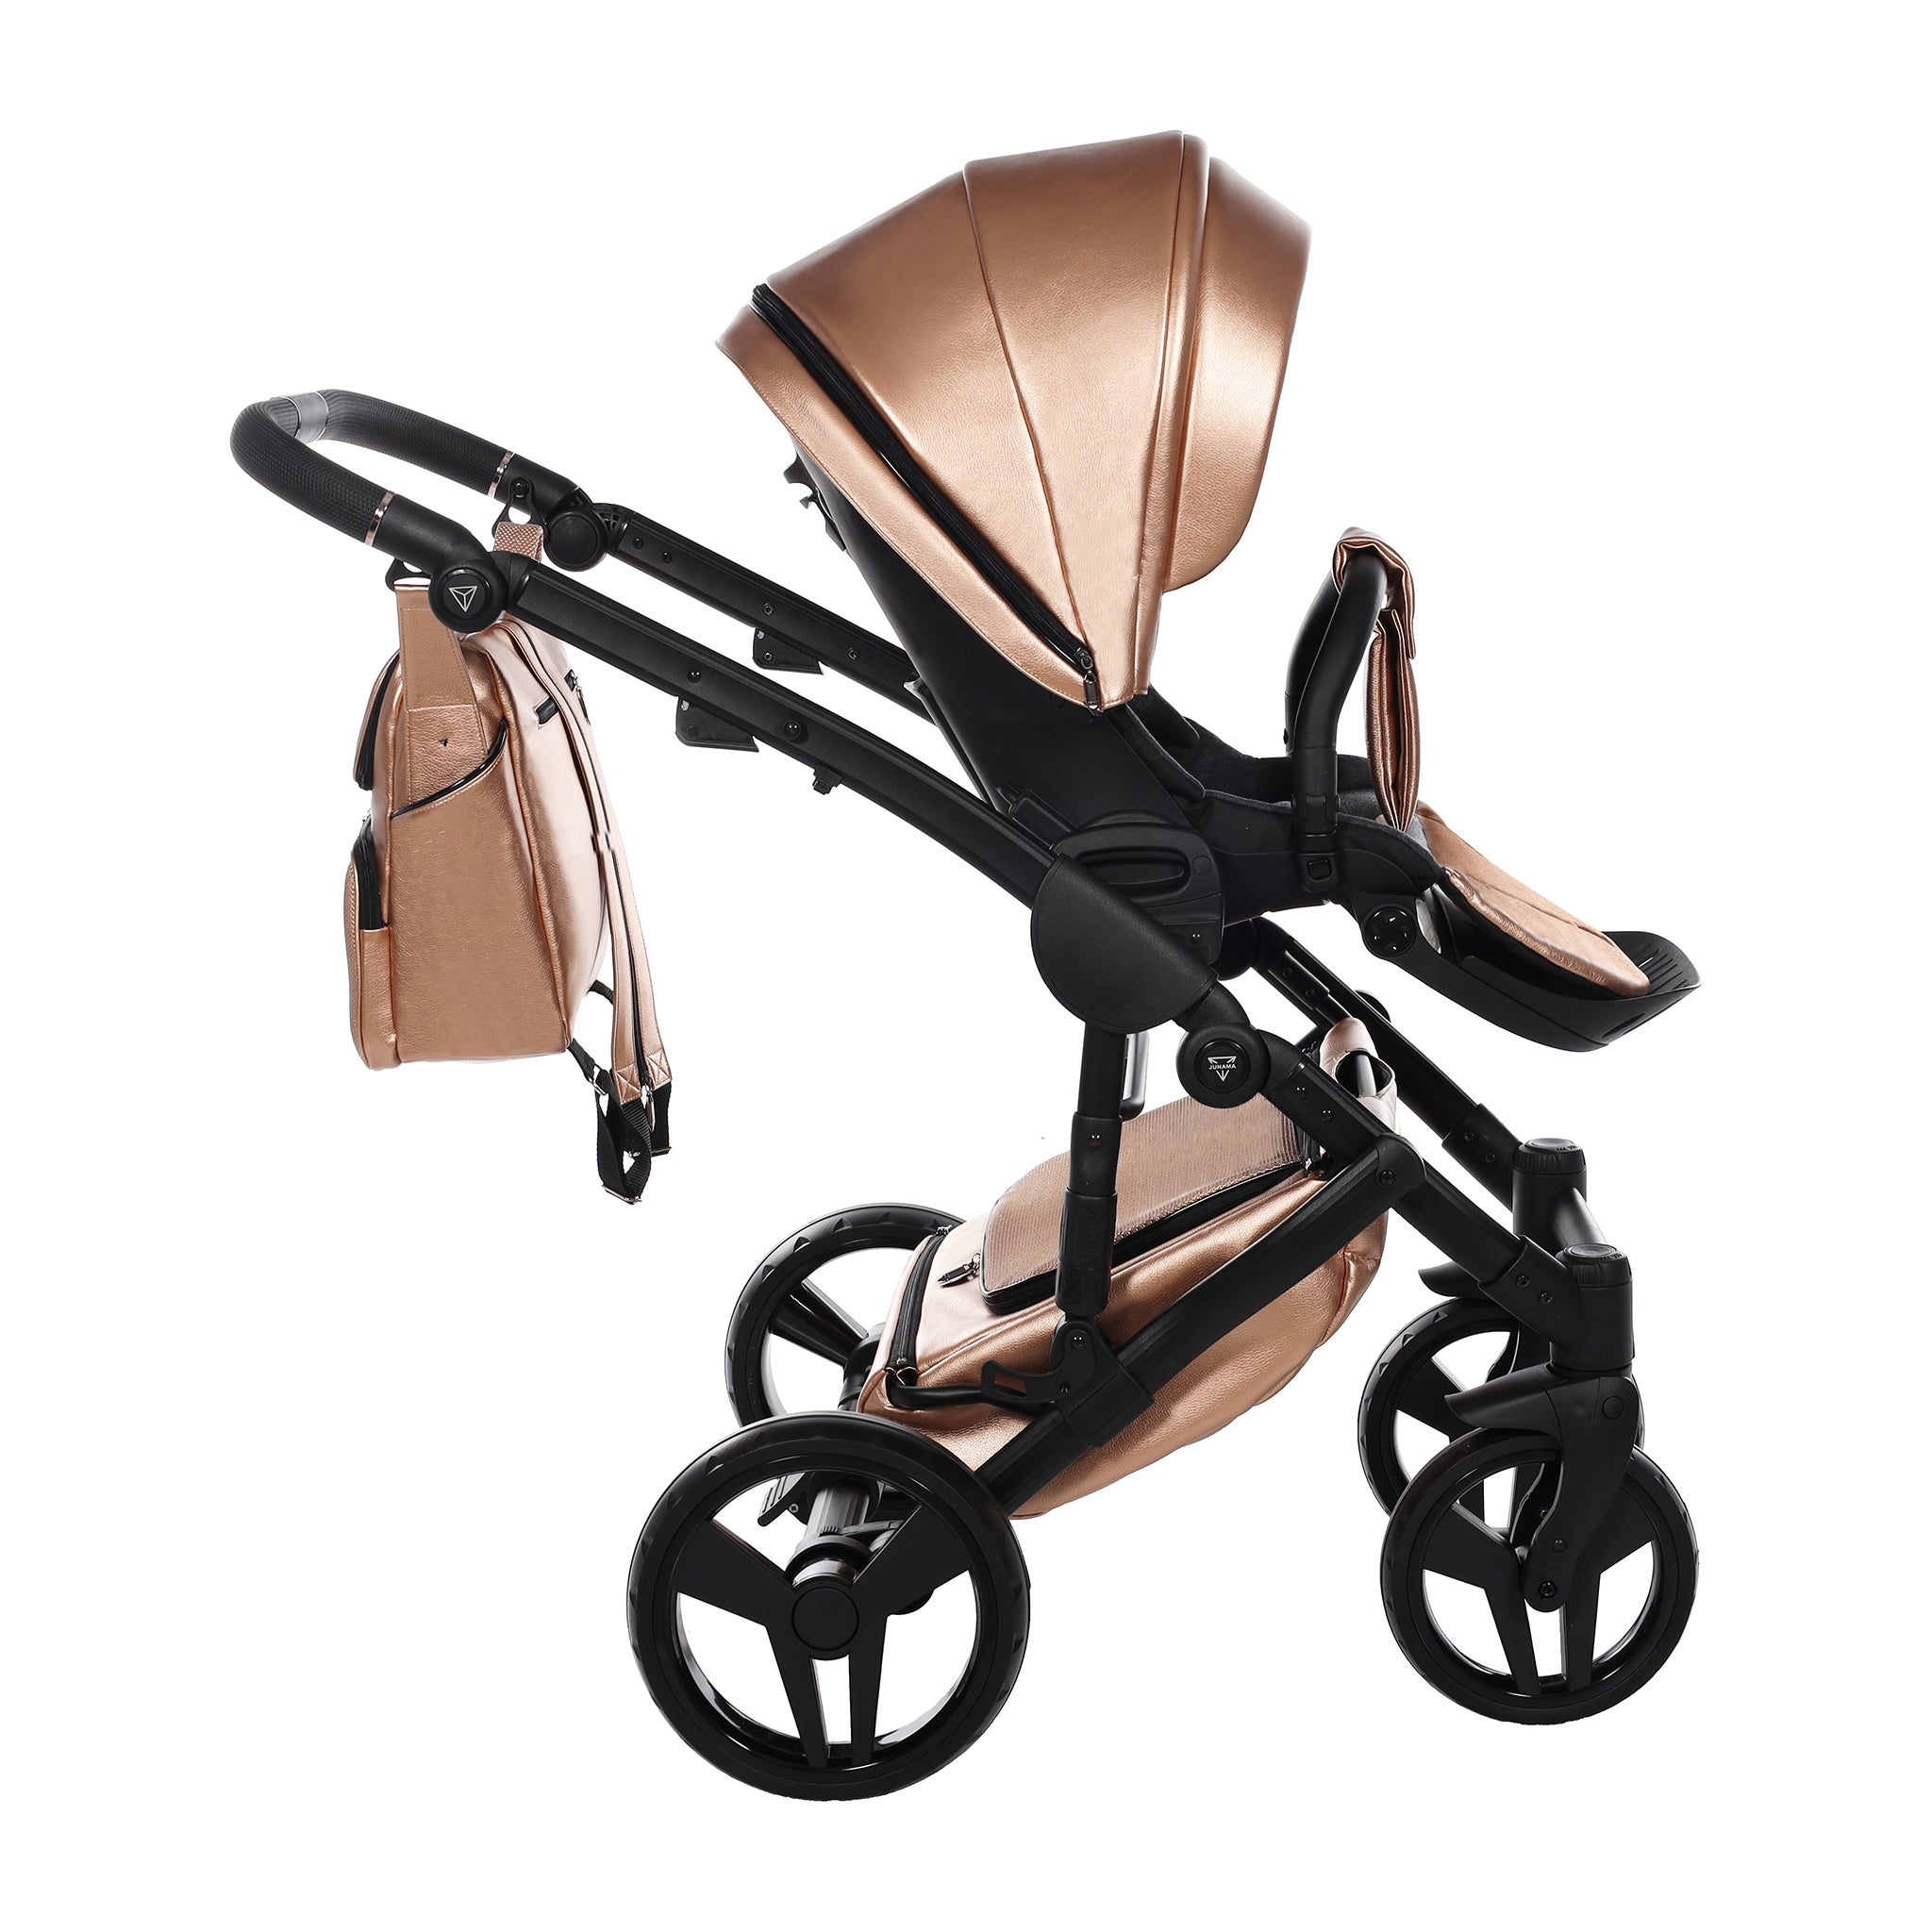 Junama S Class, baby prams or stroller 2 in 1 - Copper and Black, Code number: JUNSC05